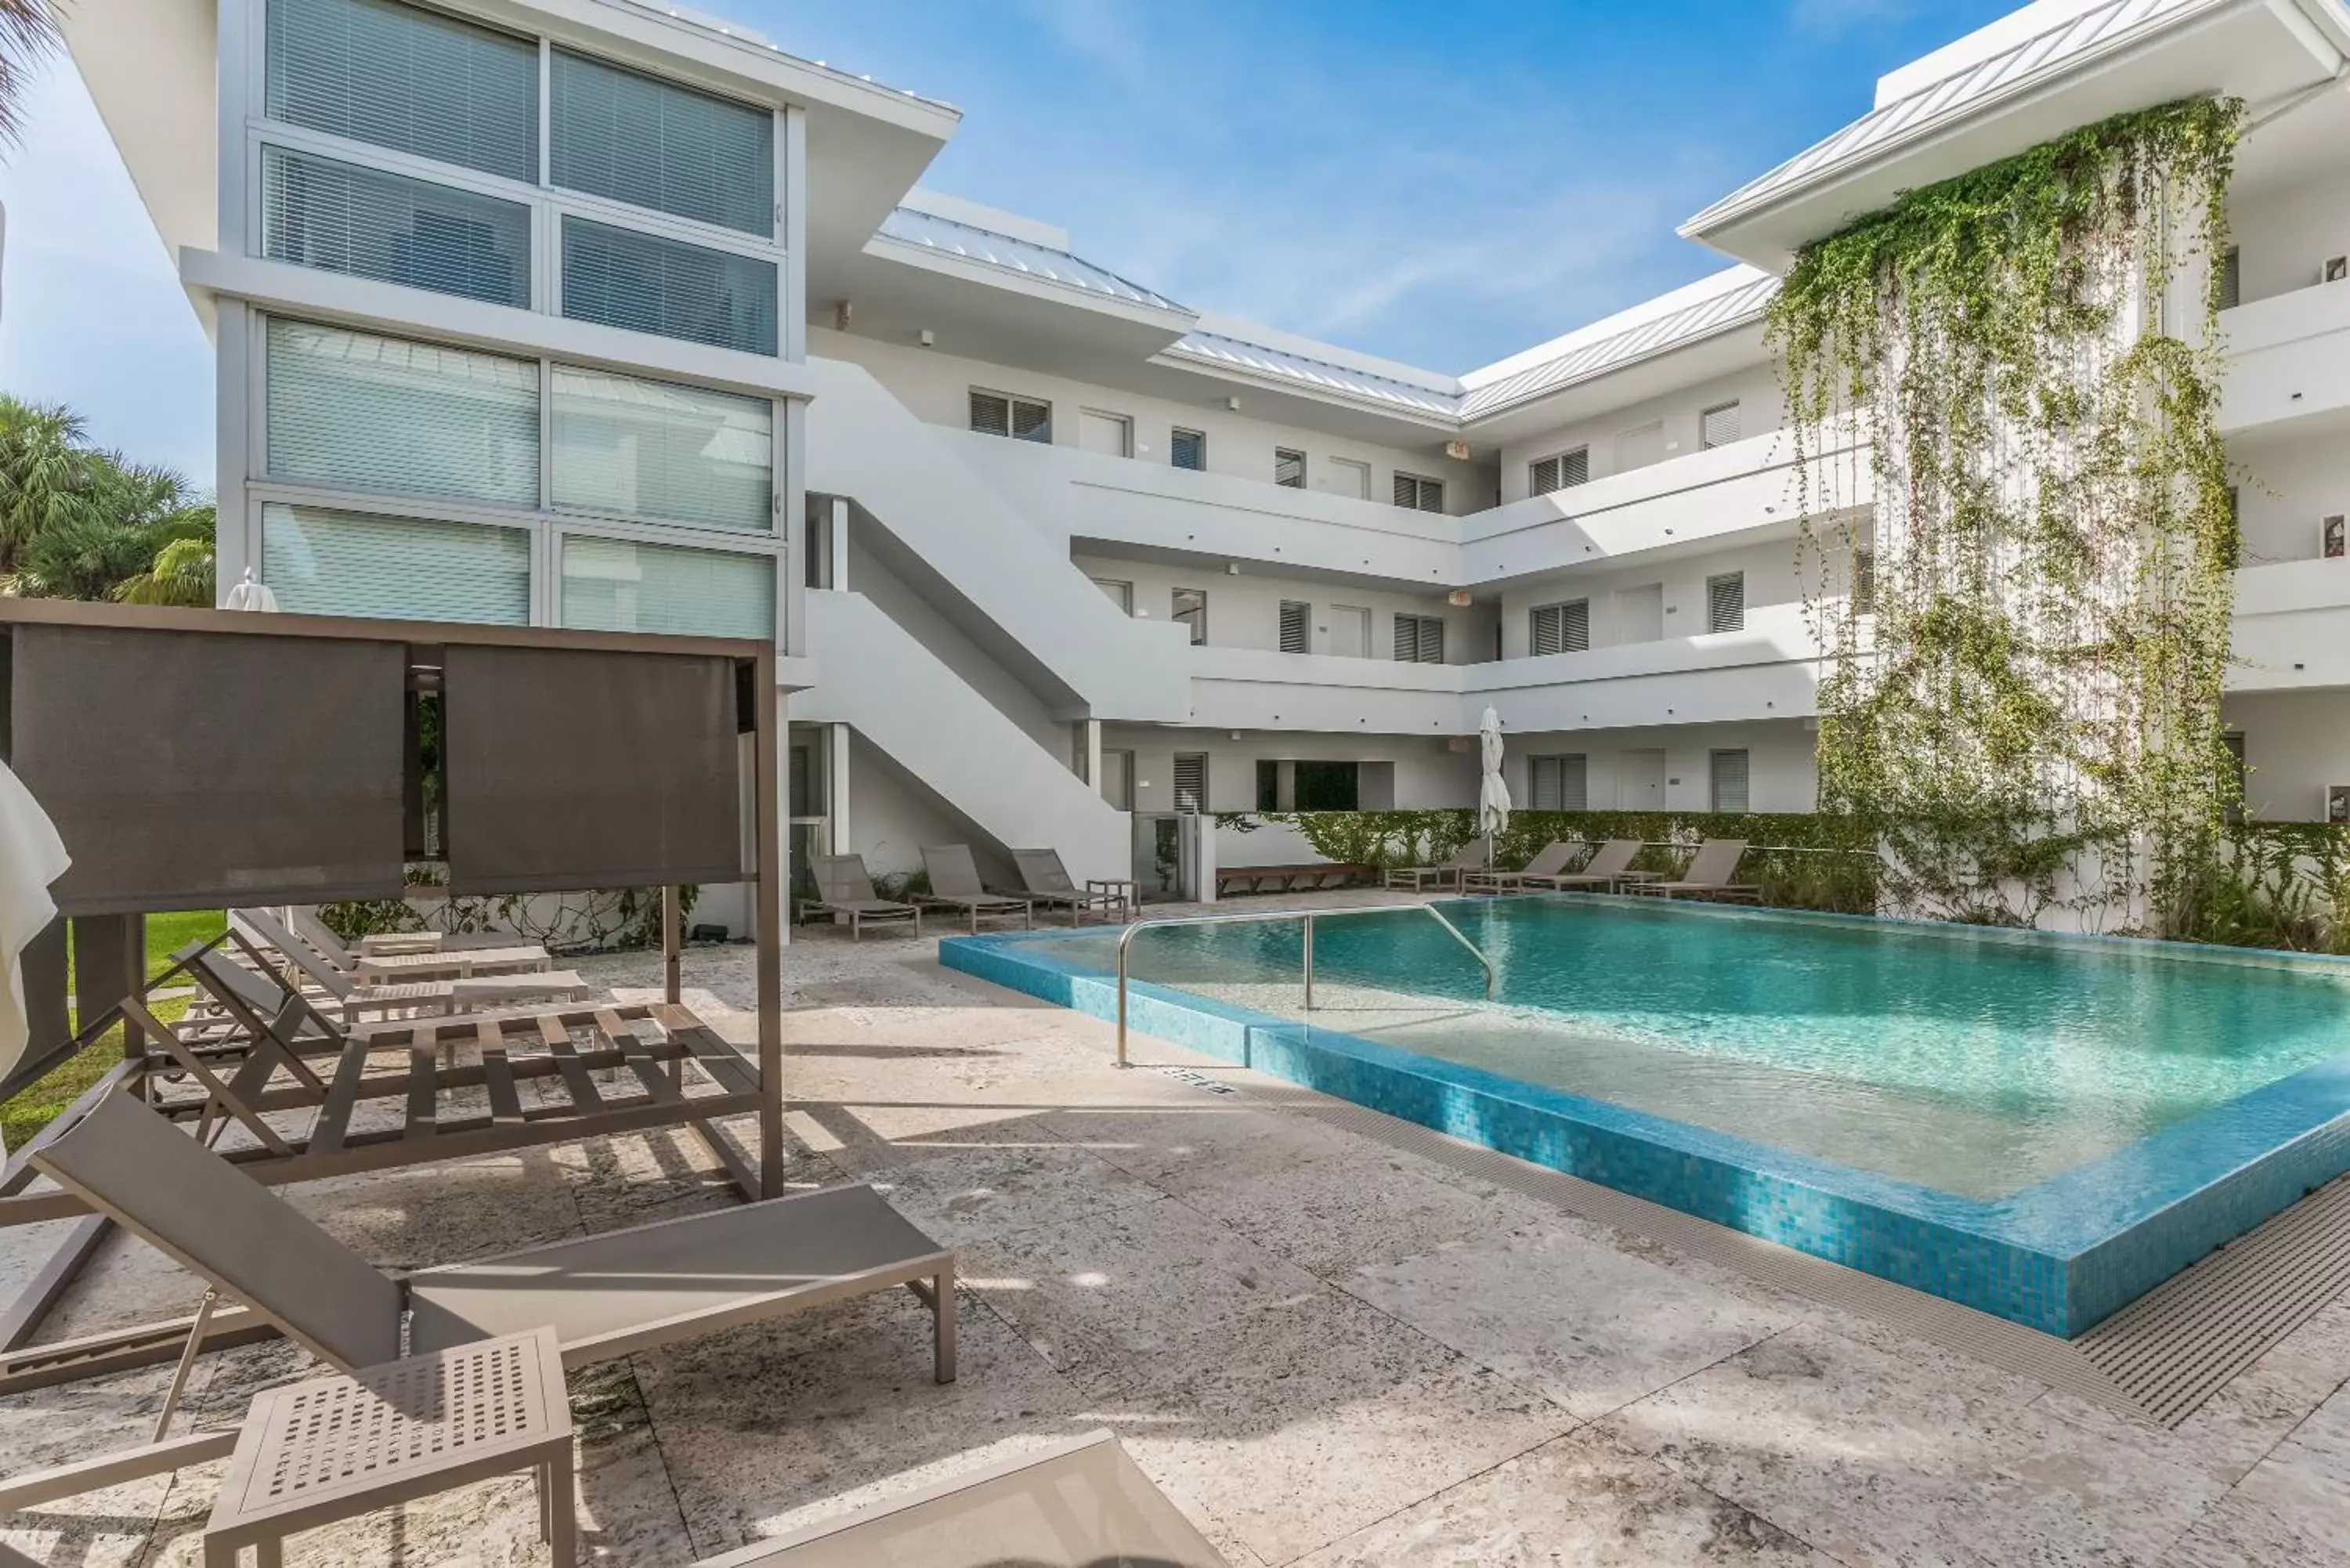 Property building, Swimming Pool in Beach Haus Key Biscayne Contemporary Apartments